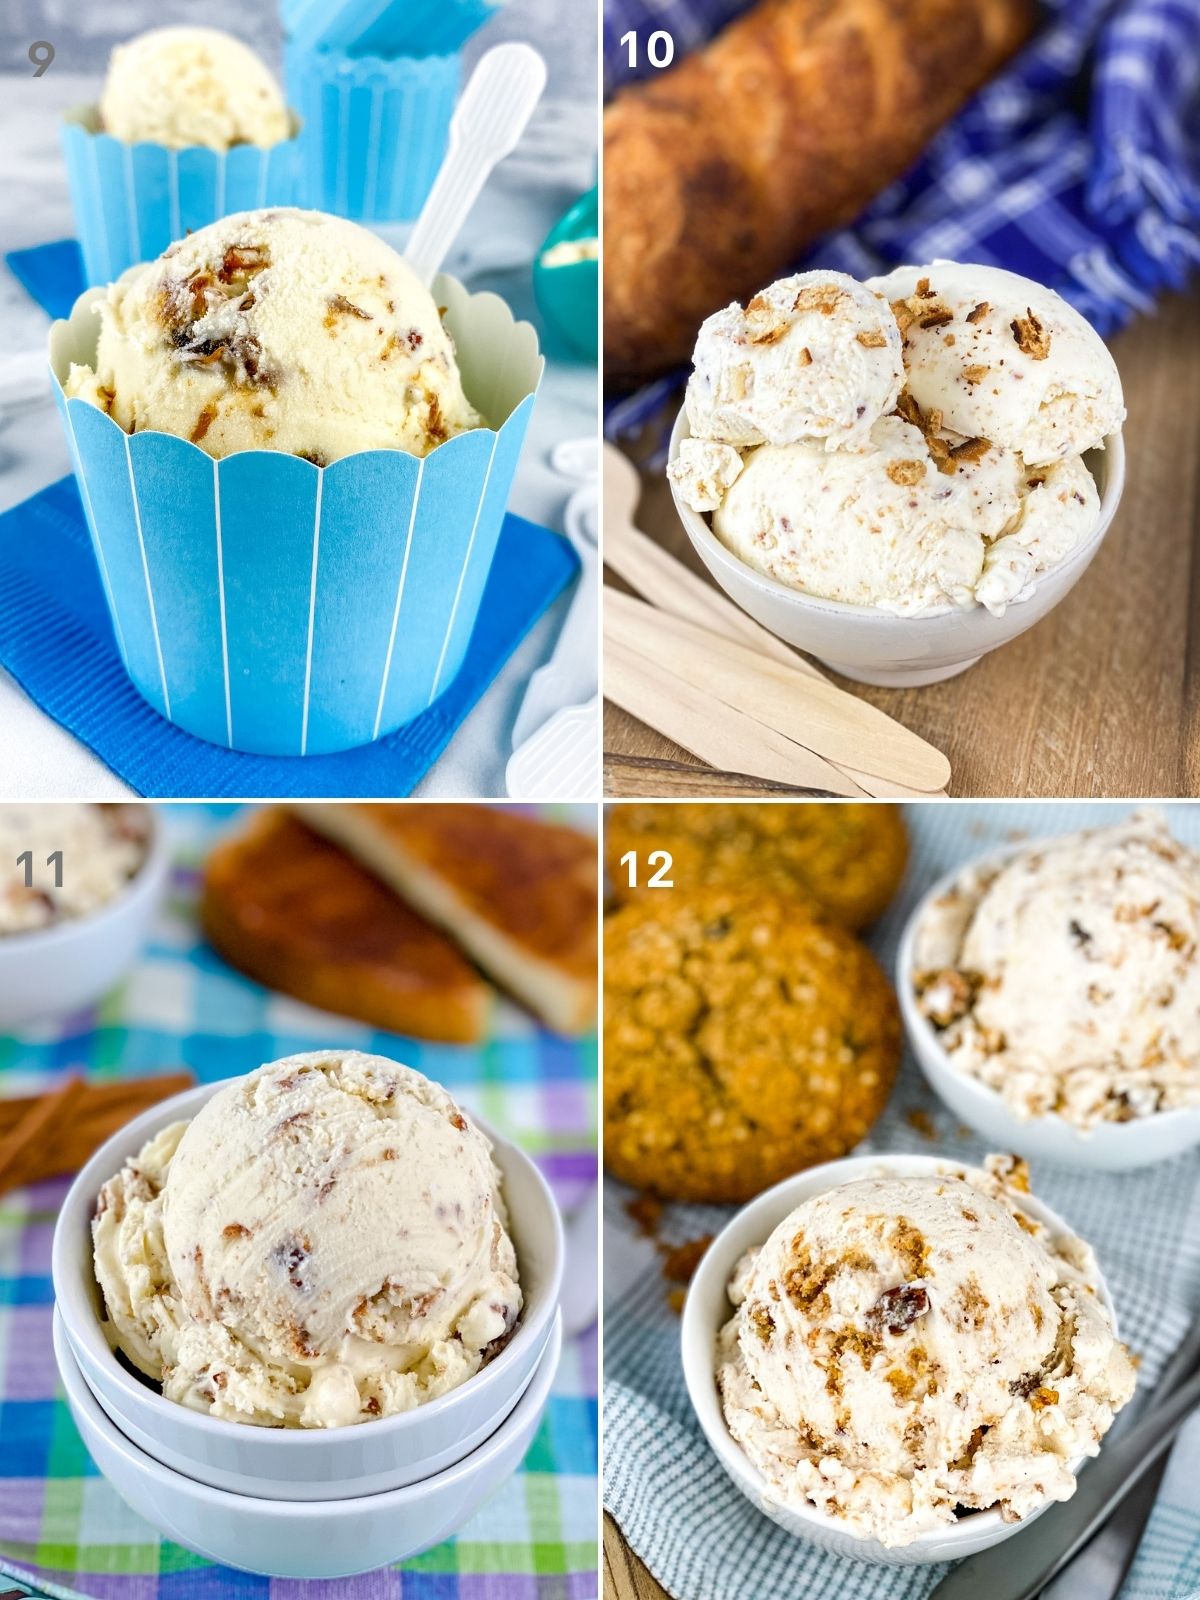 fun ice cream flavors with dates and cookies